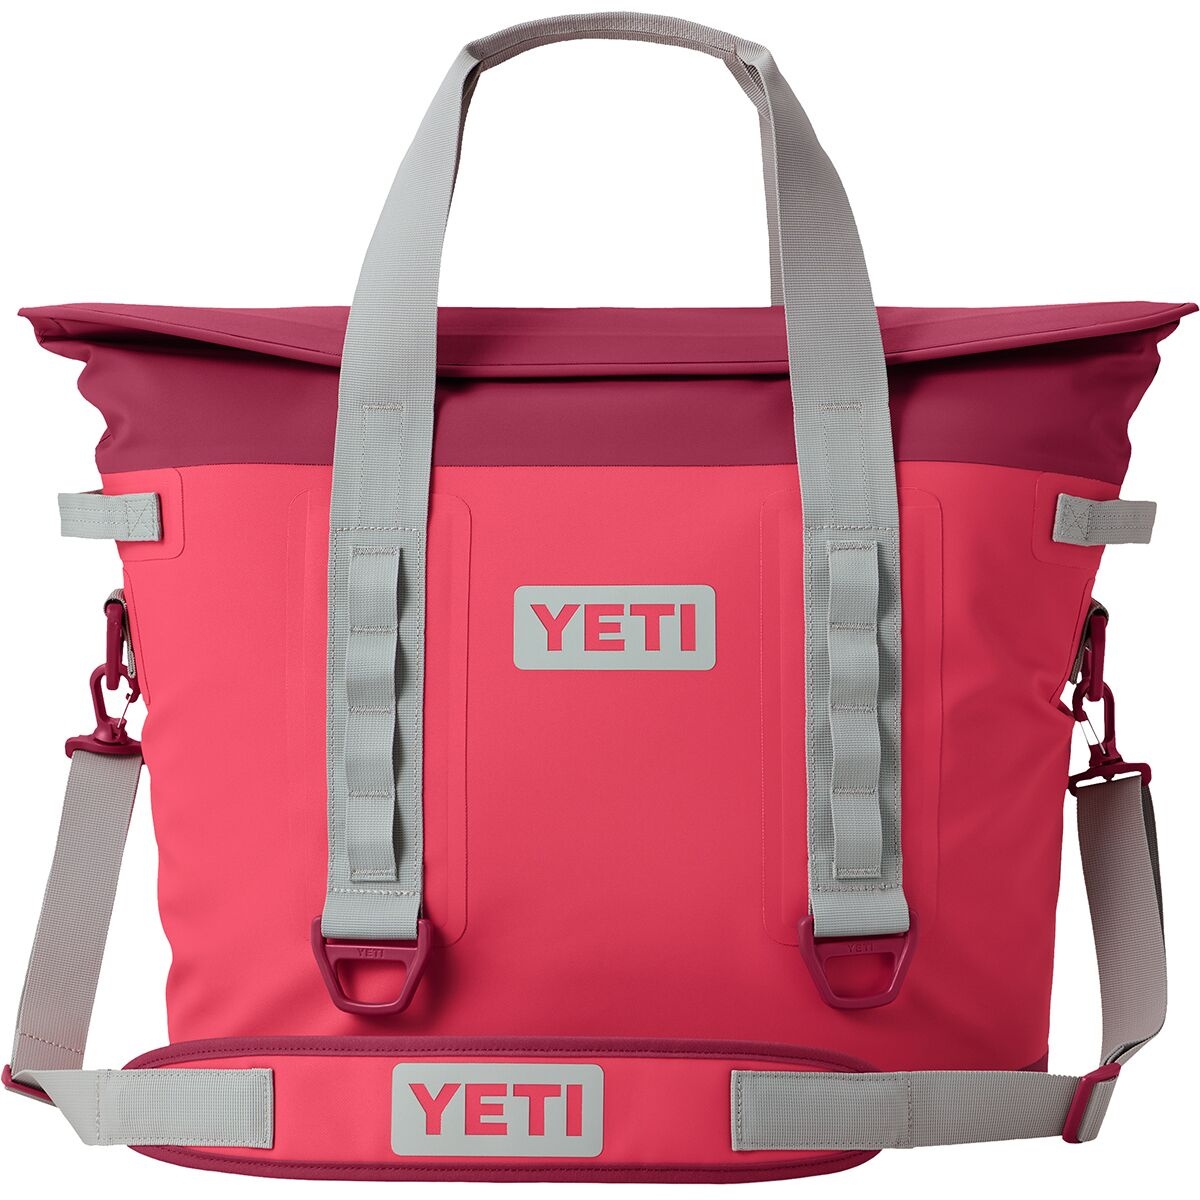 YETI Hopper M30 Review: The Ultimate Soft Cooler, With A Magnetic